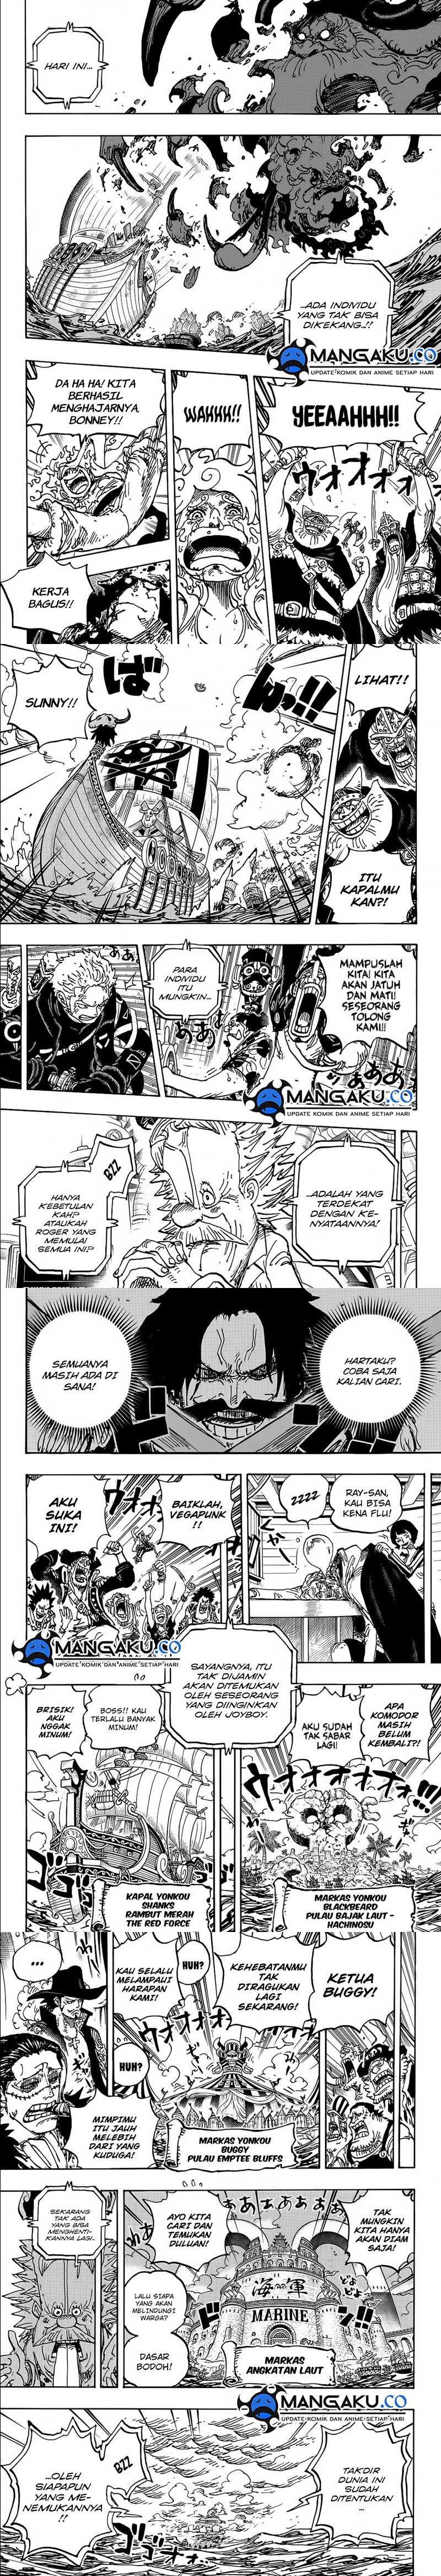 One Piece Chapter 1121